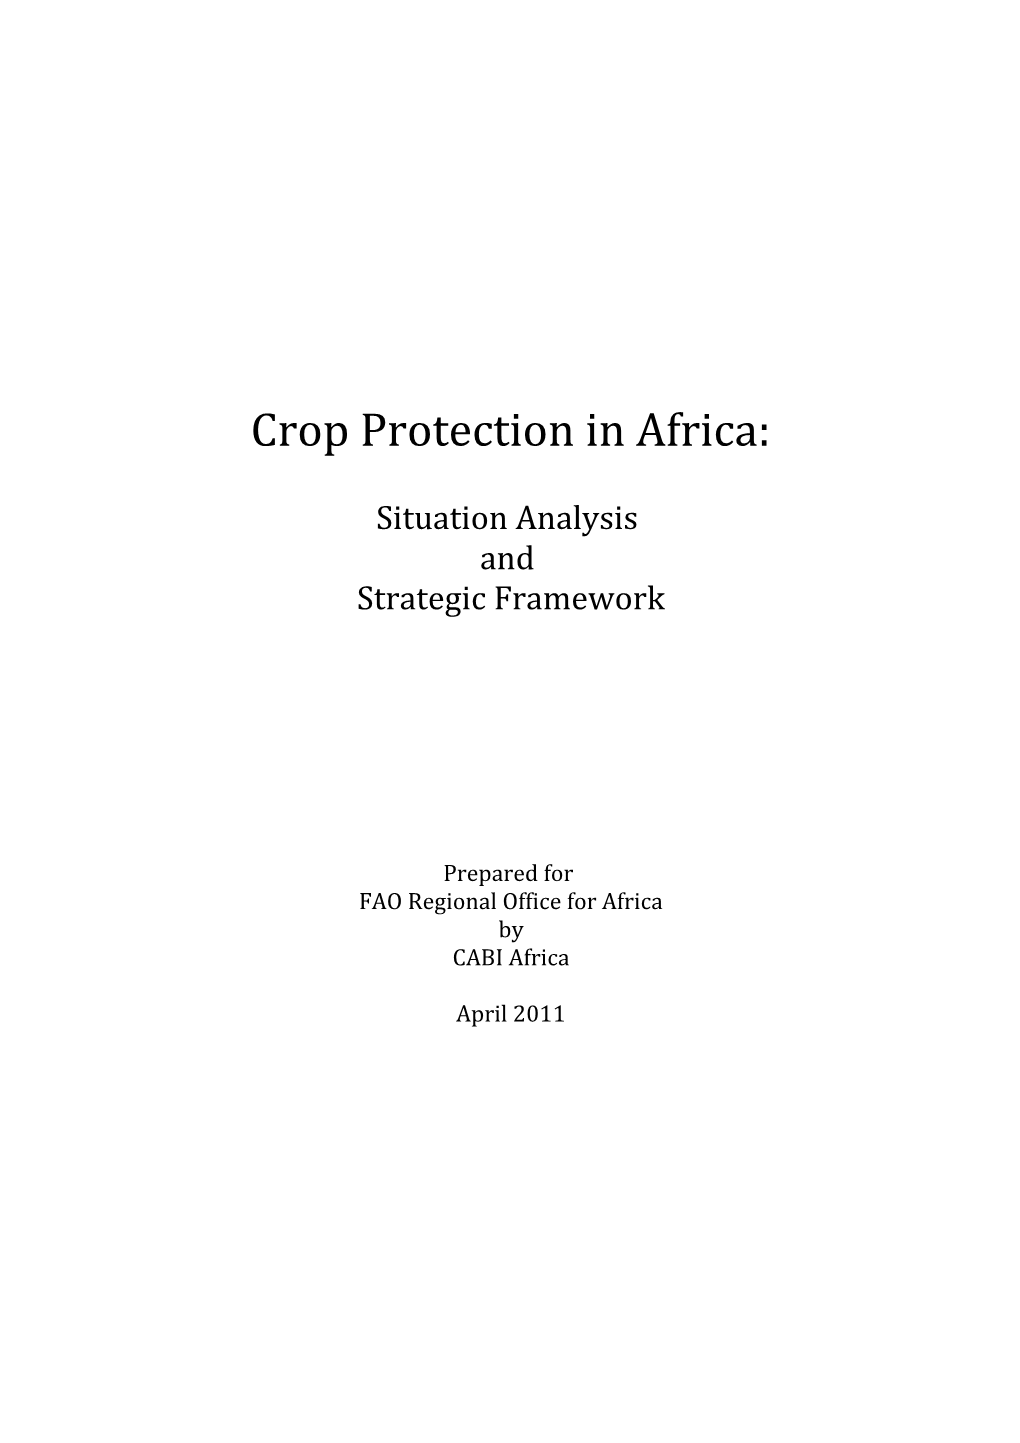 Crop Protection in Africa